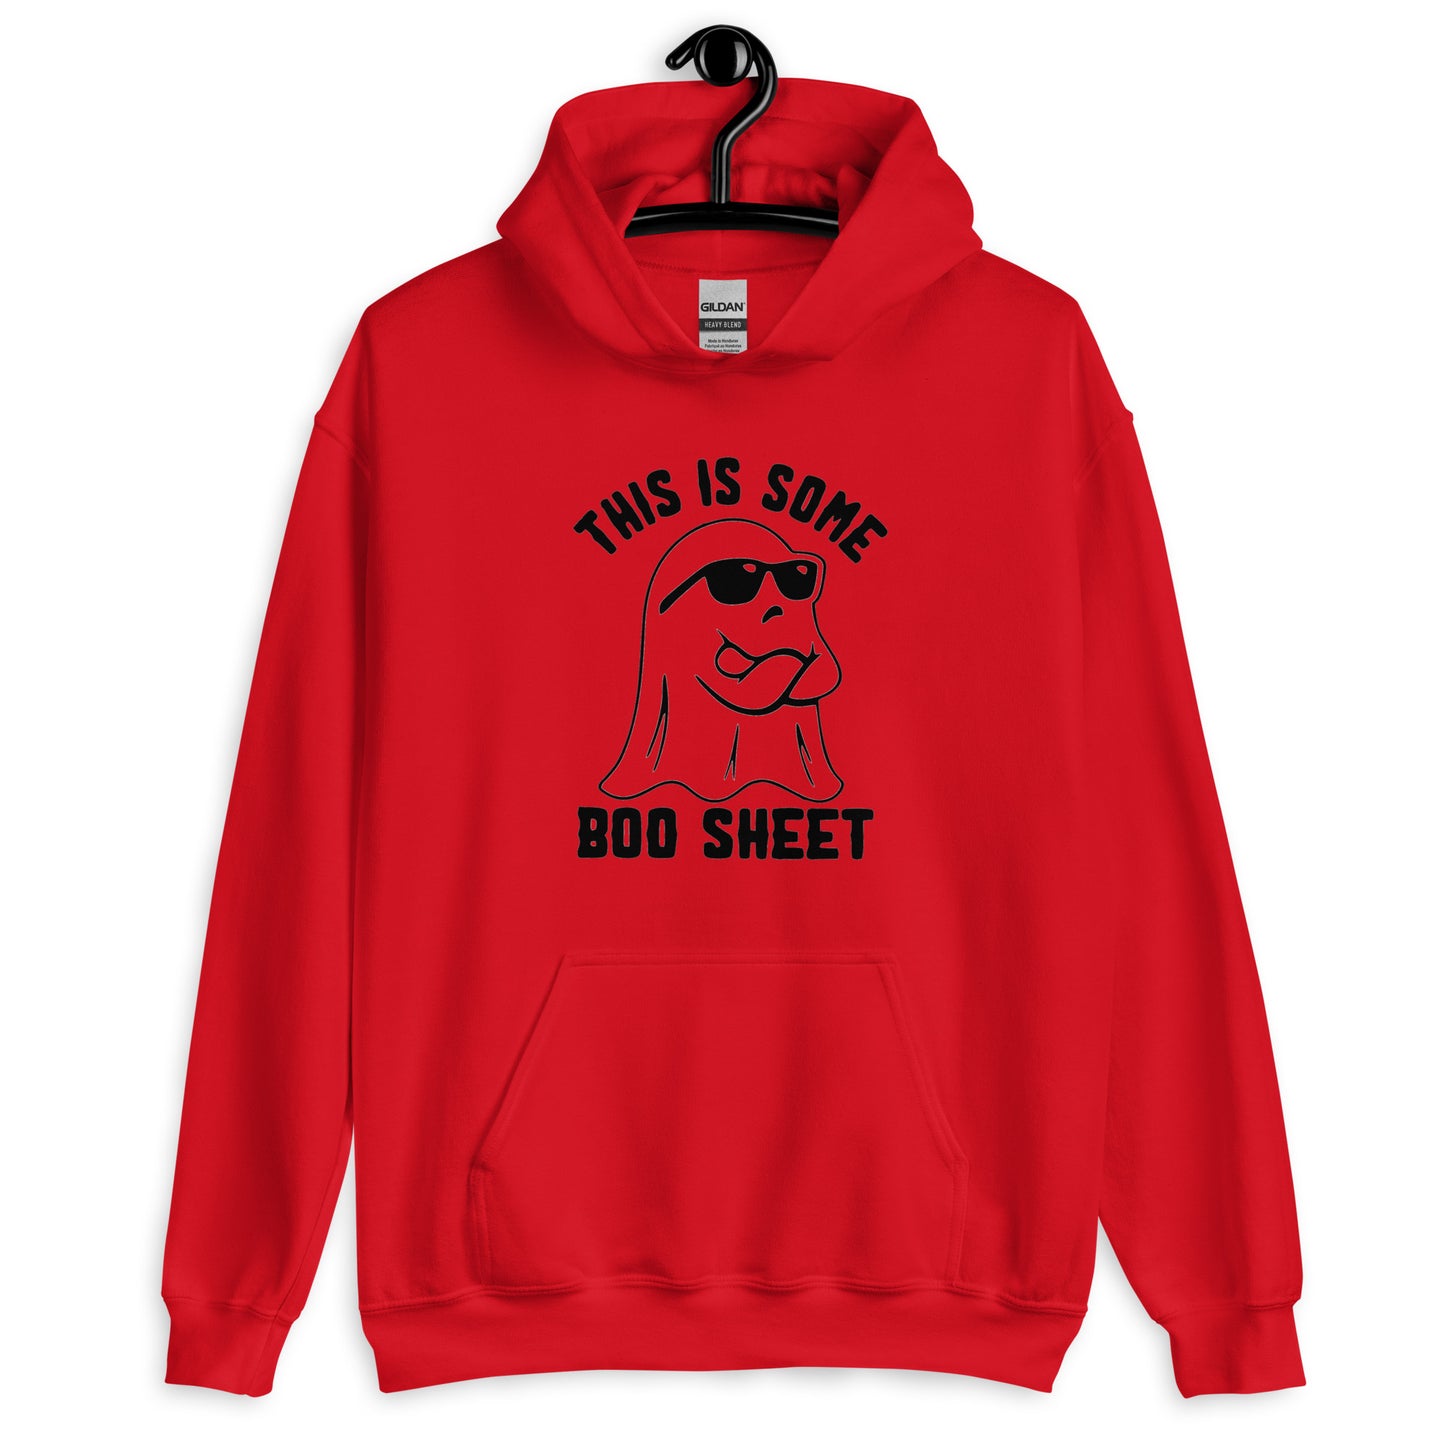 This Some Boo Sheet Hoodie